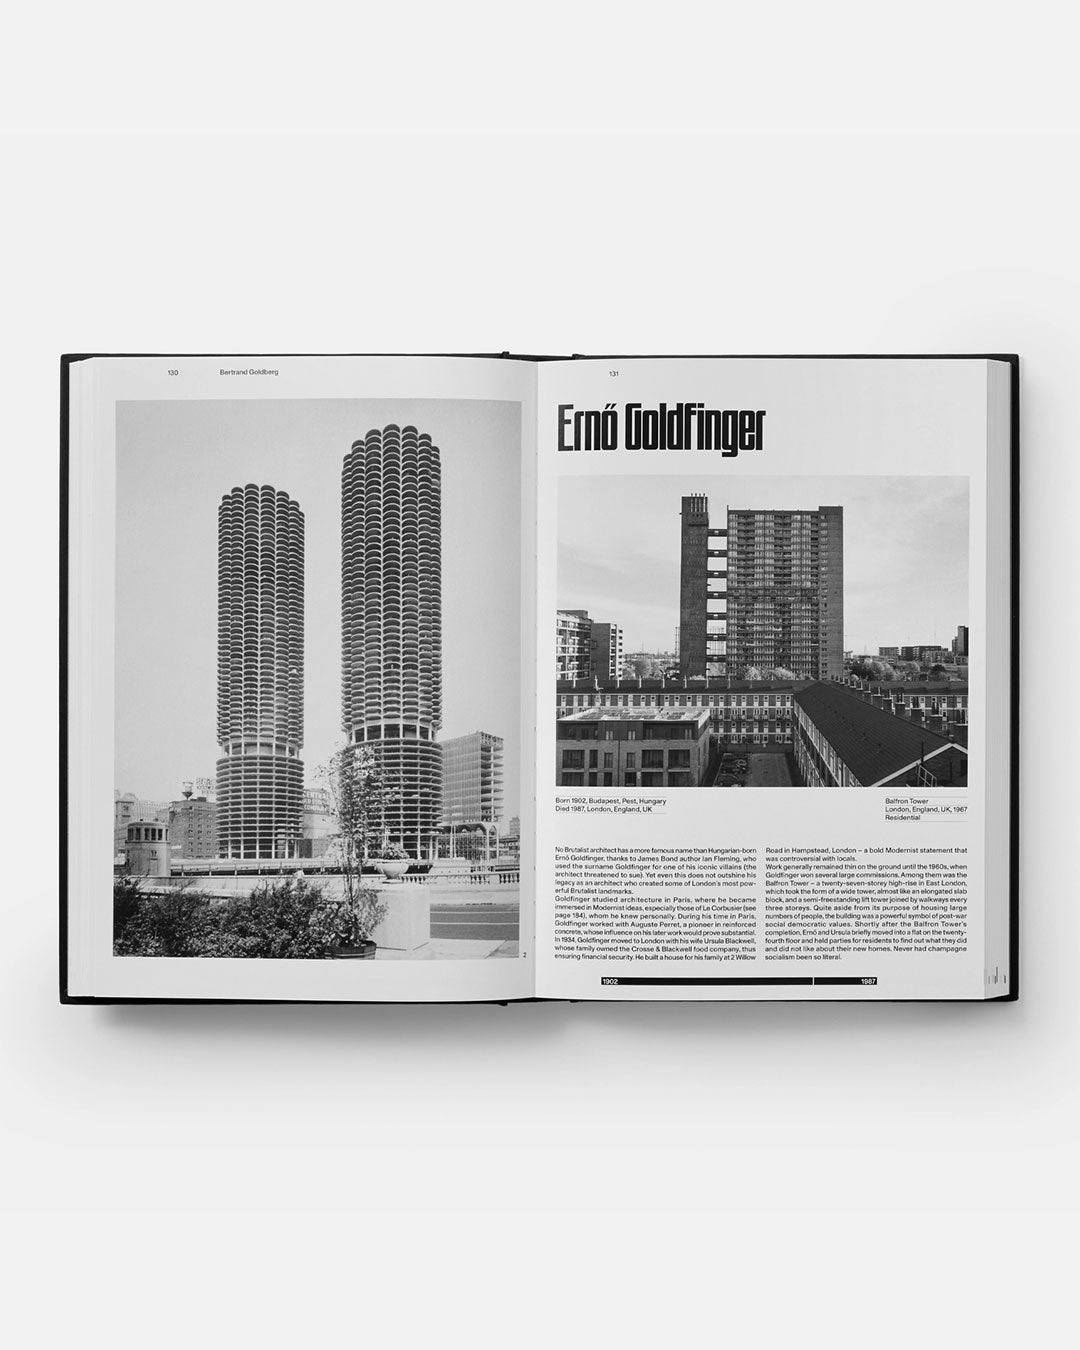 The Brutalists: Brutalism’s Best Architects by Owen Hopkins